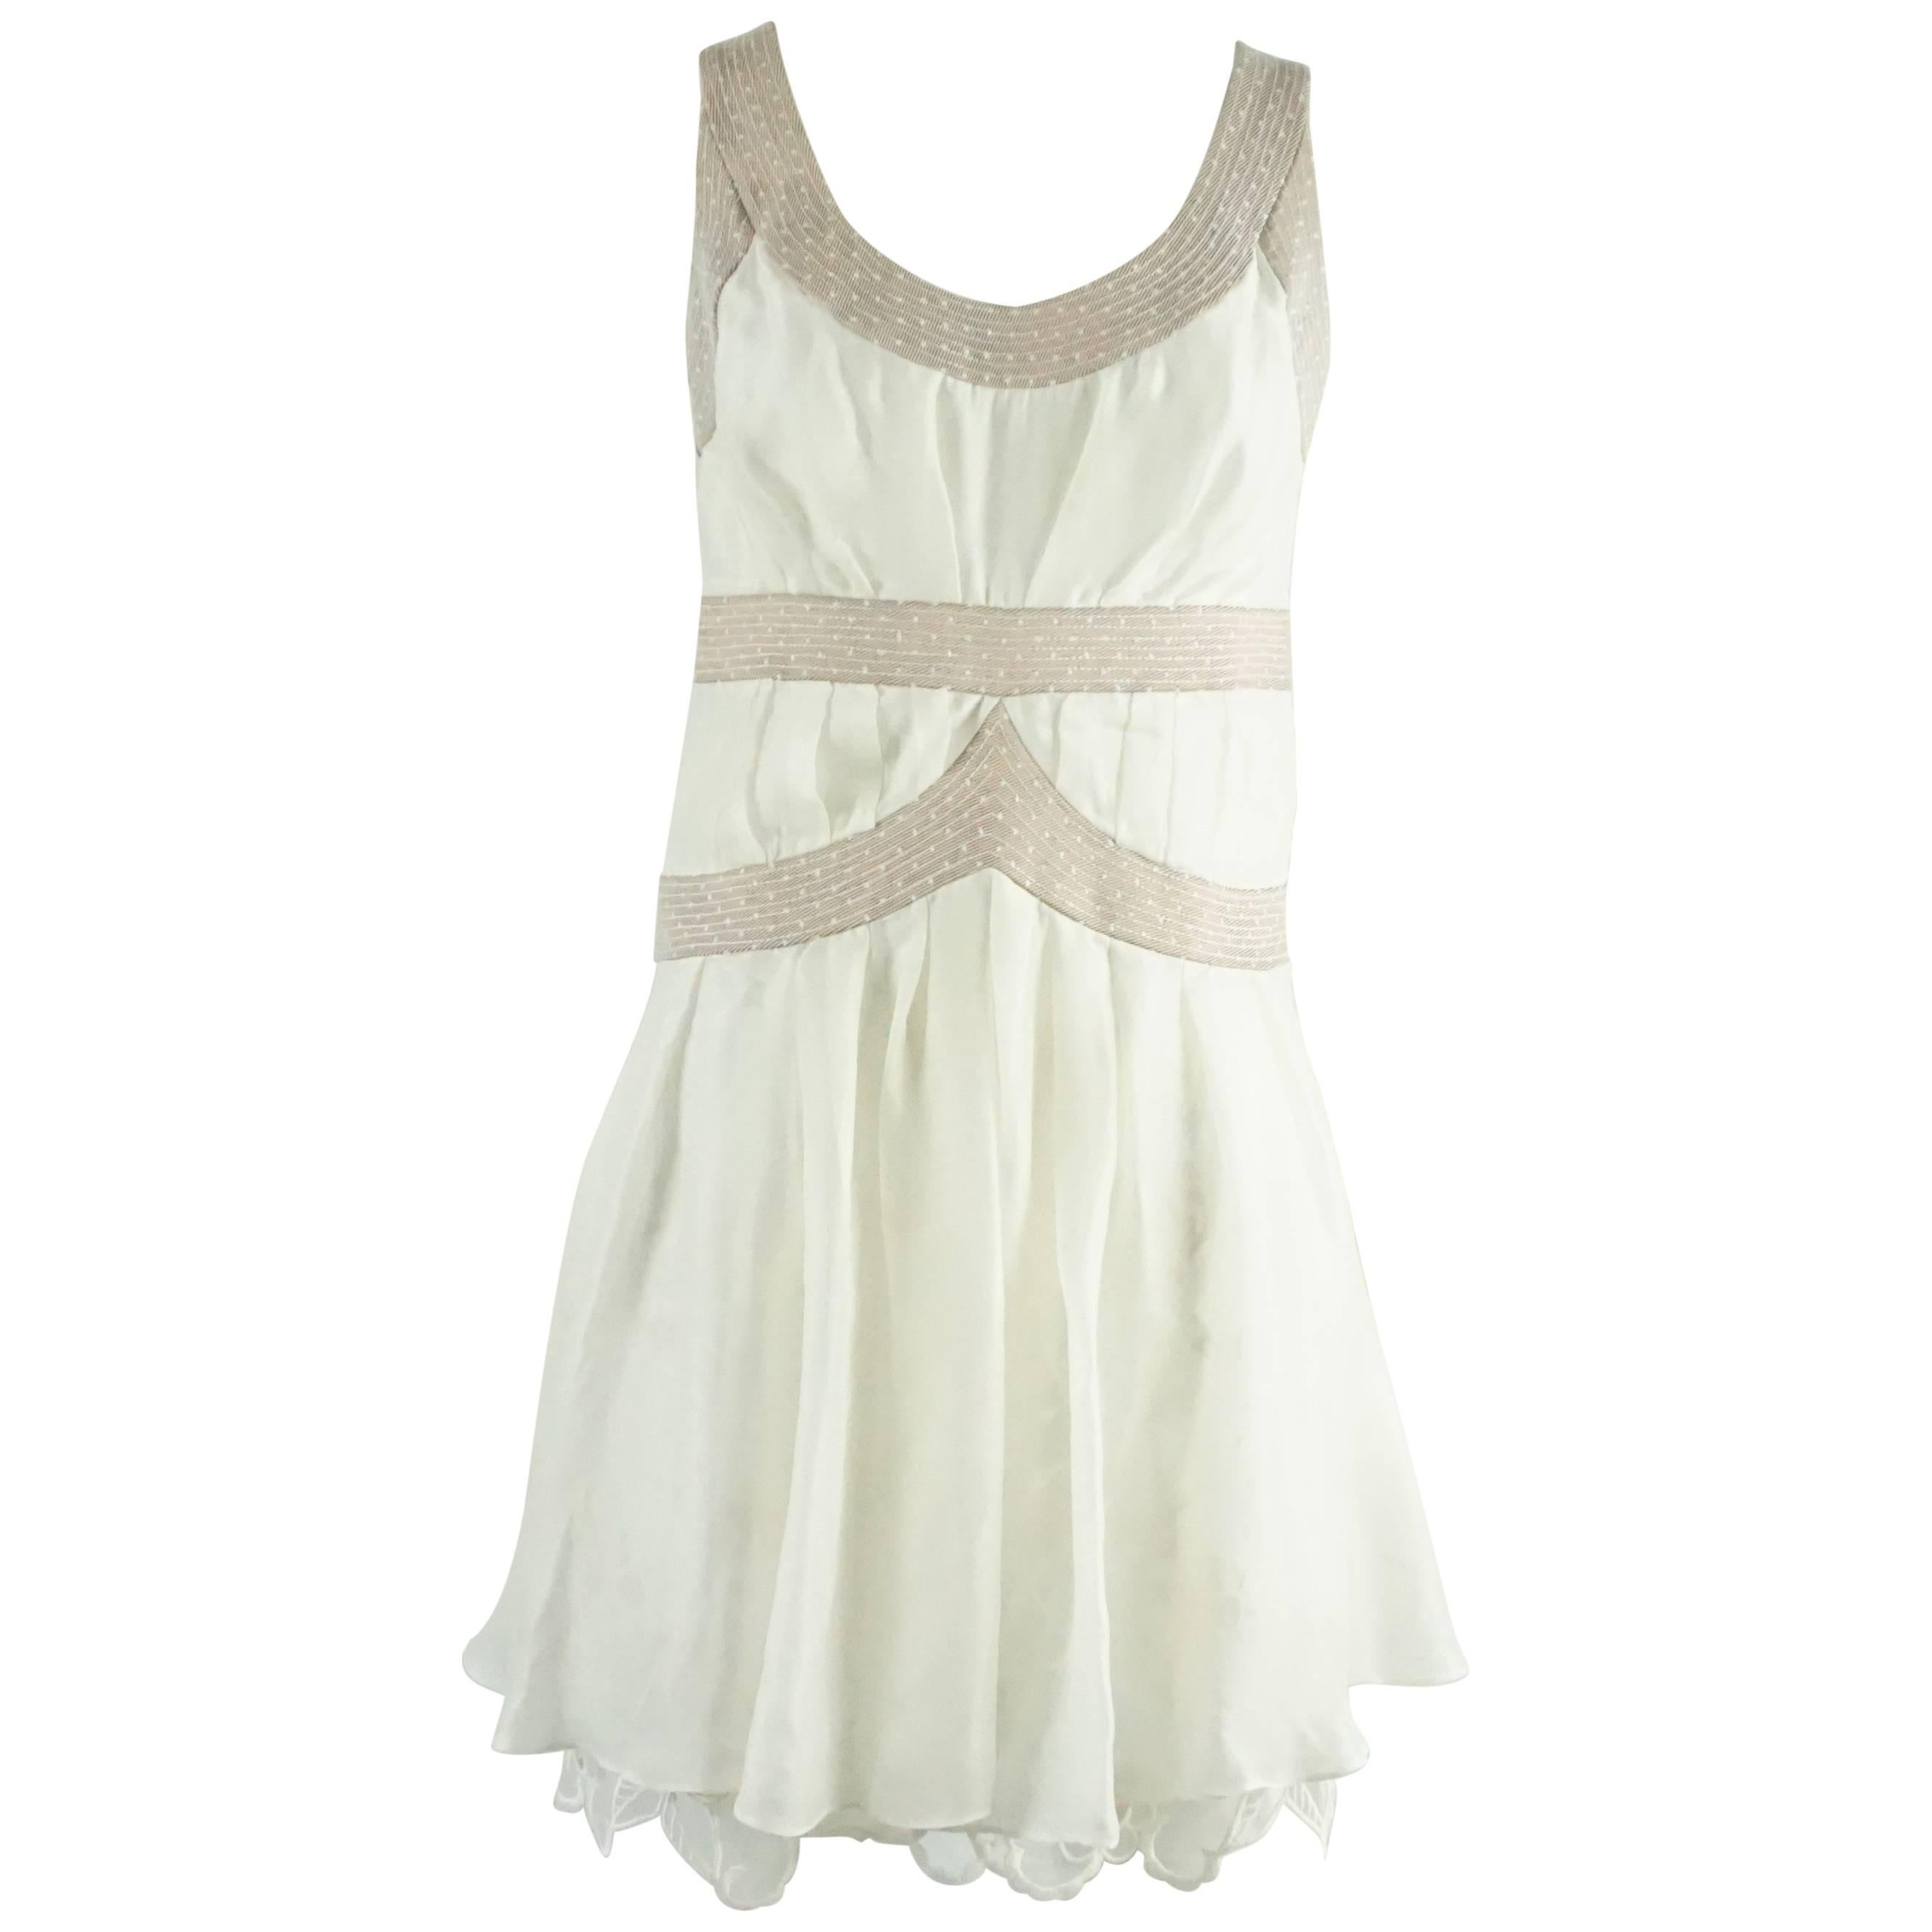 Nina Ricci Ivory Cotton and Lace Slip Dress - 6 - Spring 2006 Collection For Sale